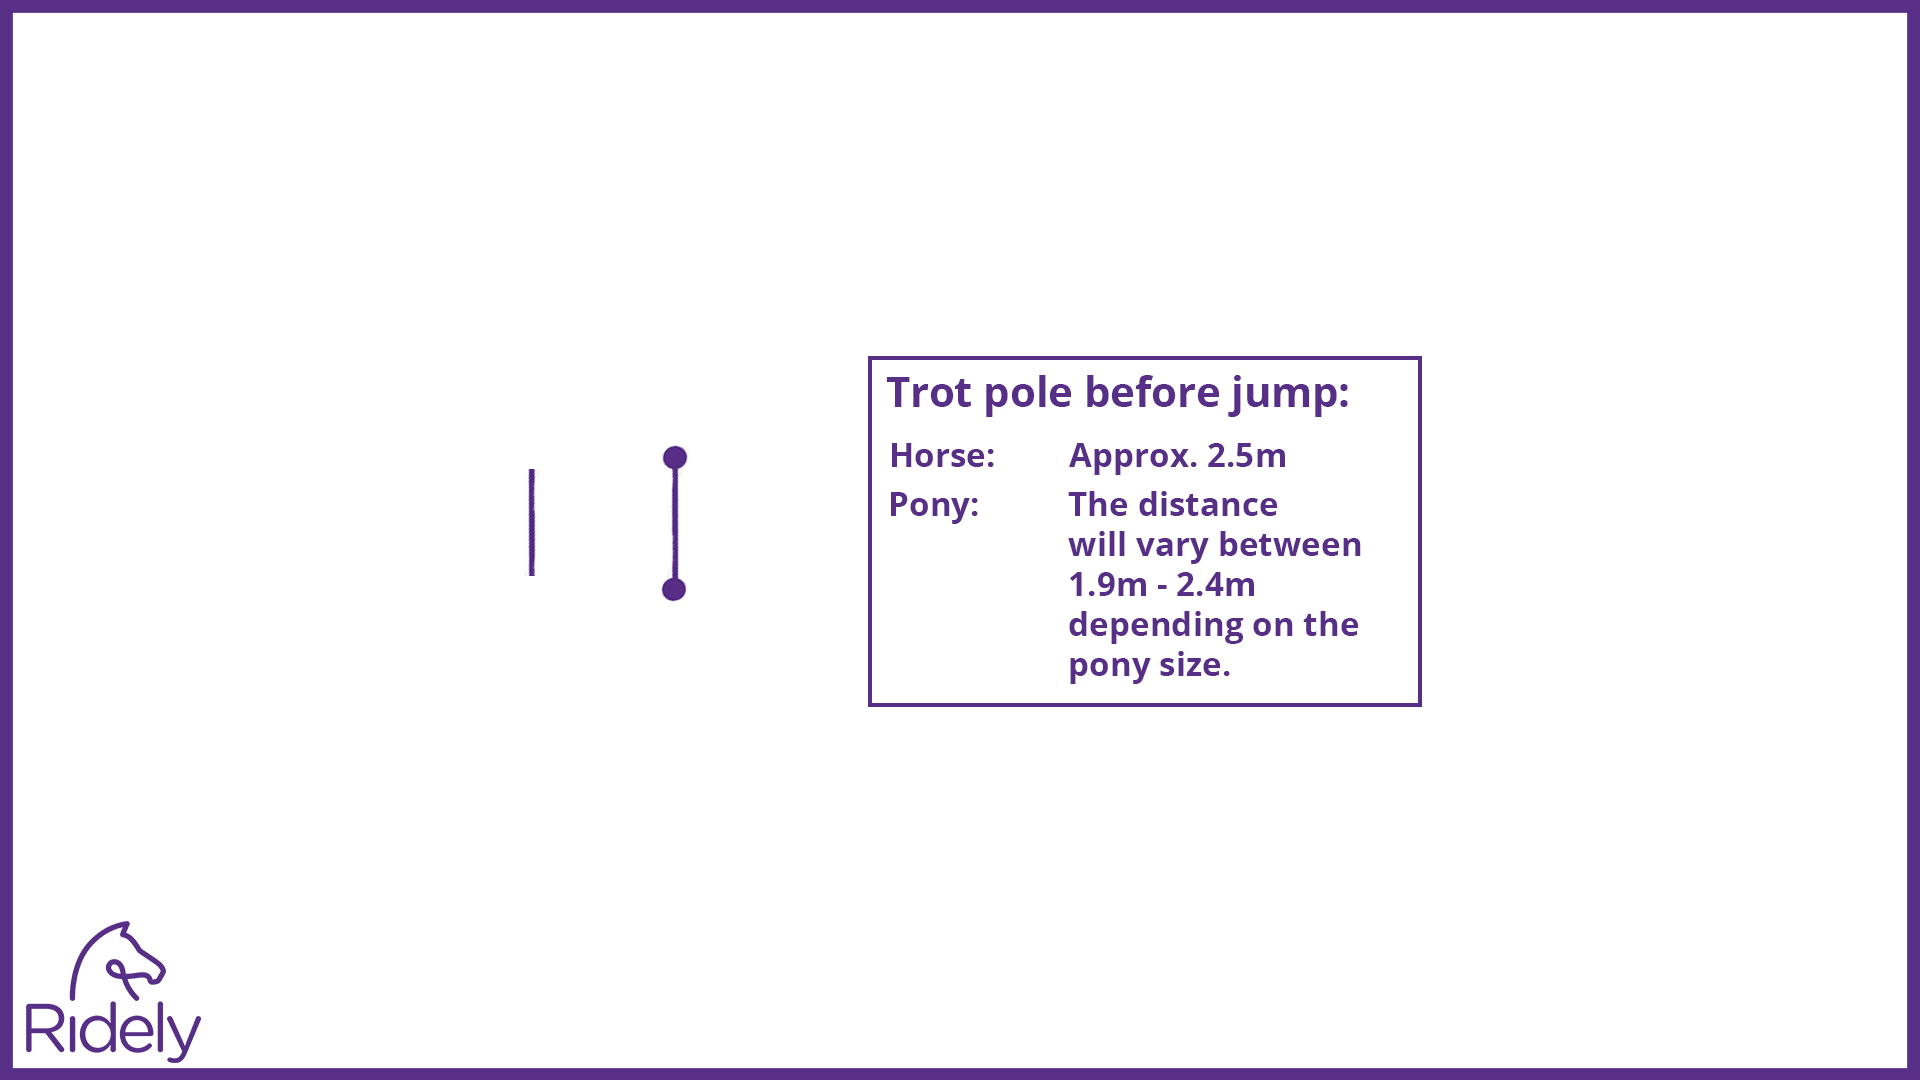 Trot pole before jump